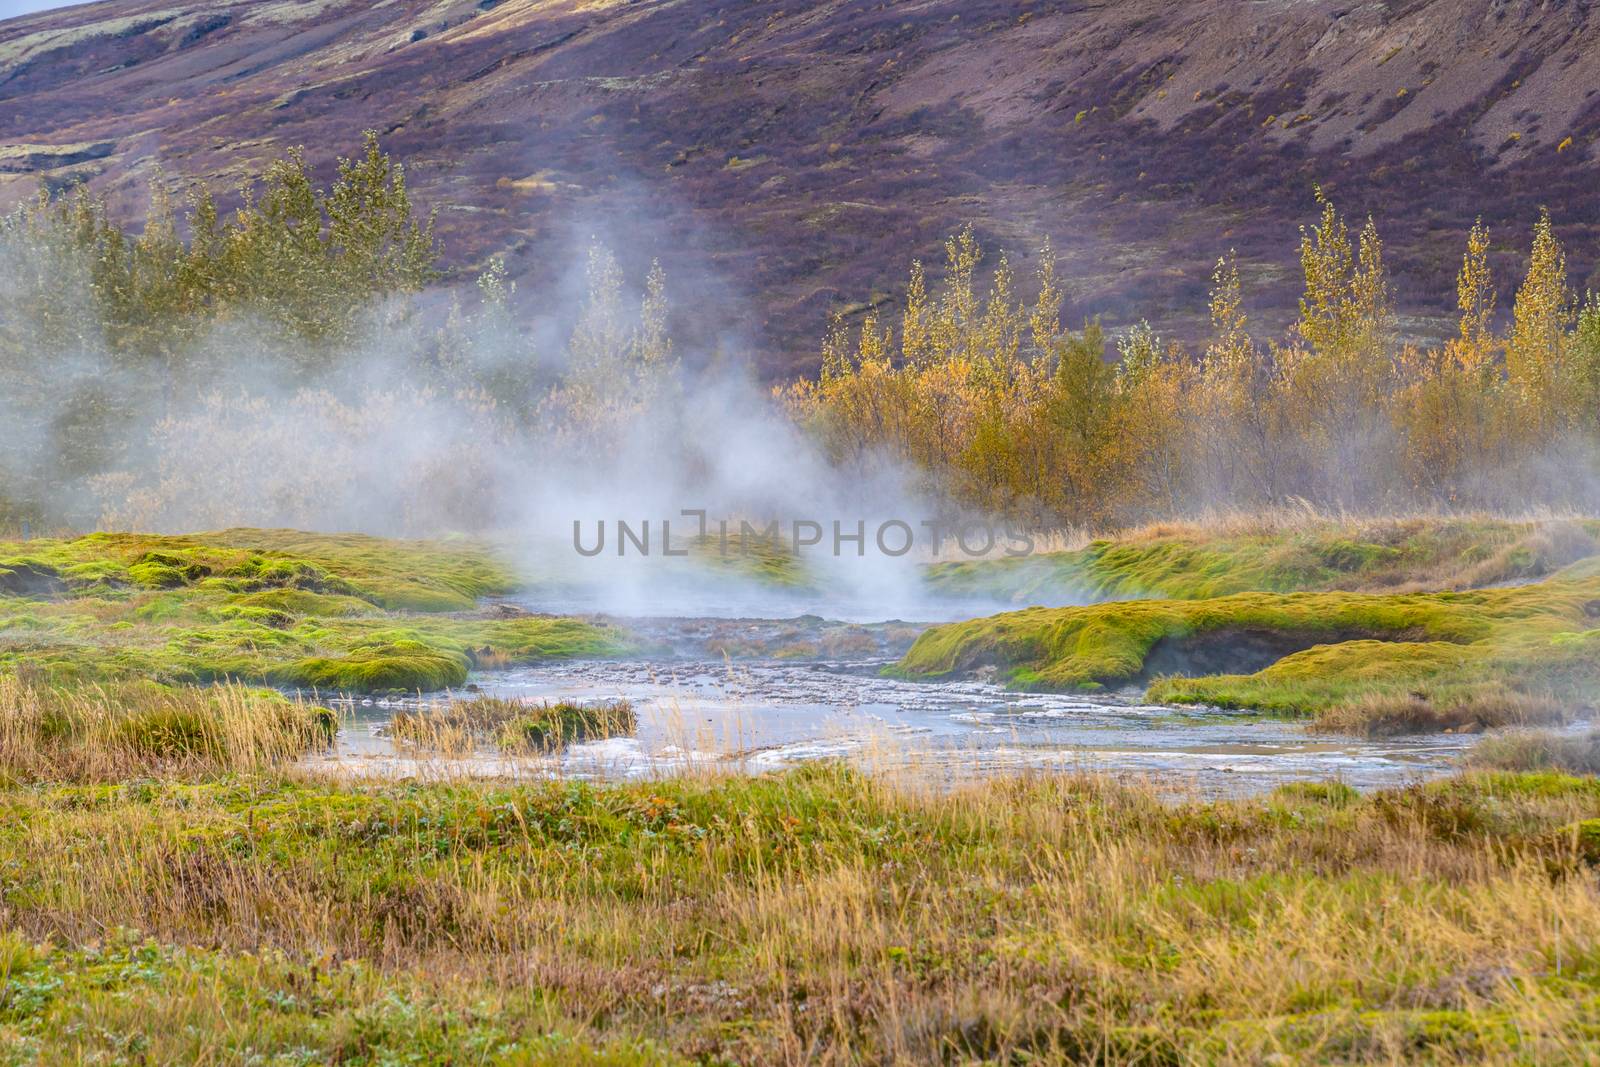 Geysir Golden Circle in Iceland geothermal hot springs muddy active landscape